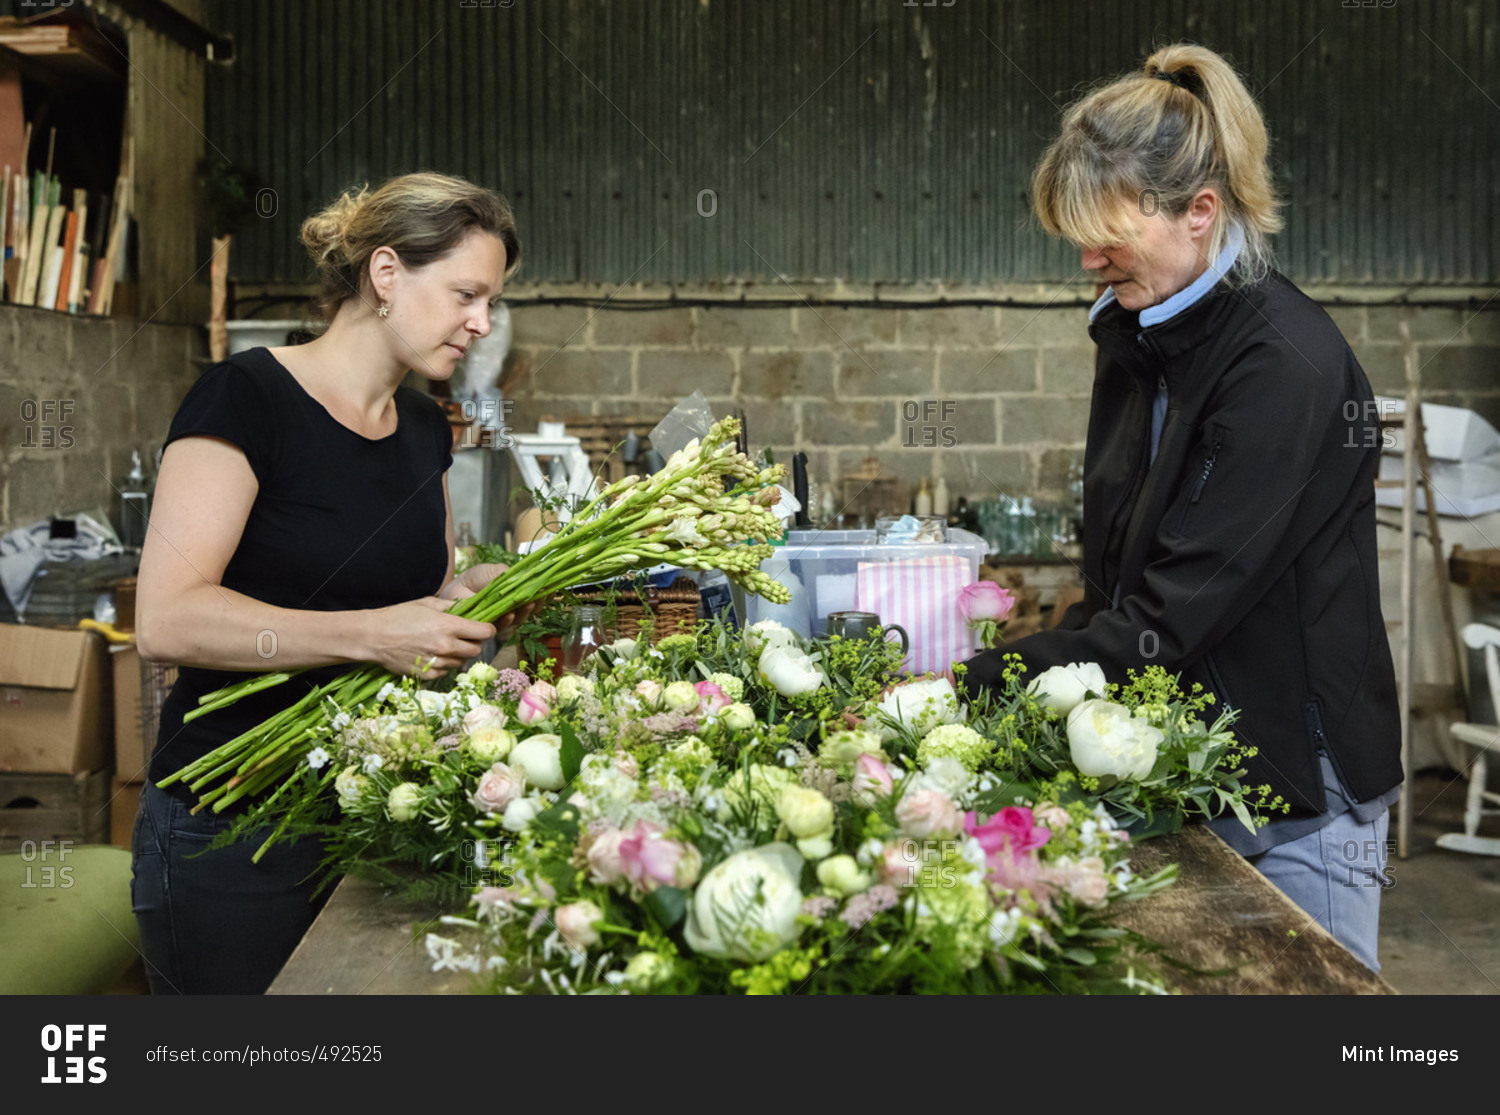 Commercial flower arranging. Two women at a workbench creating floral table decorations and arrangements.